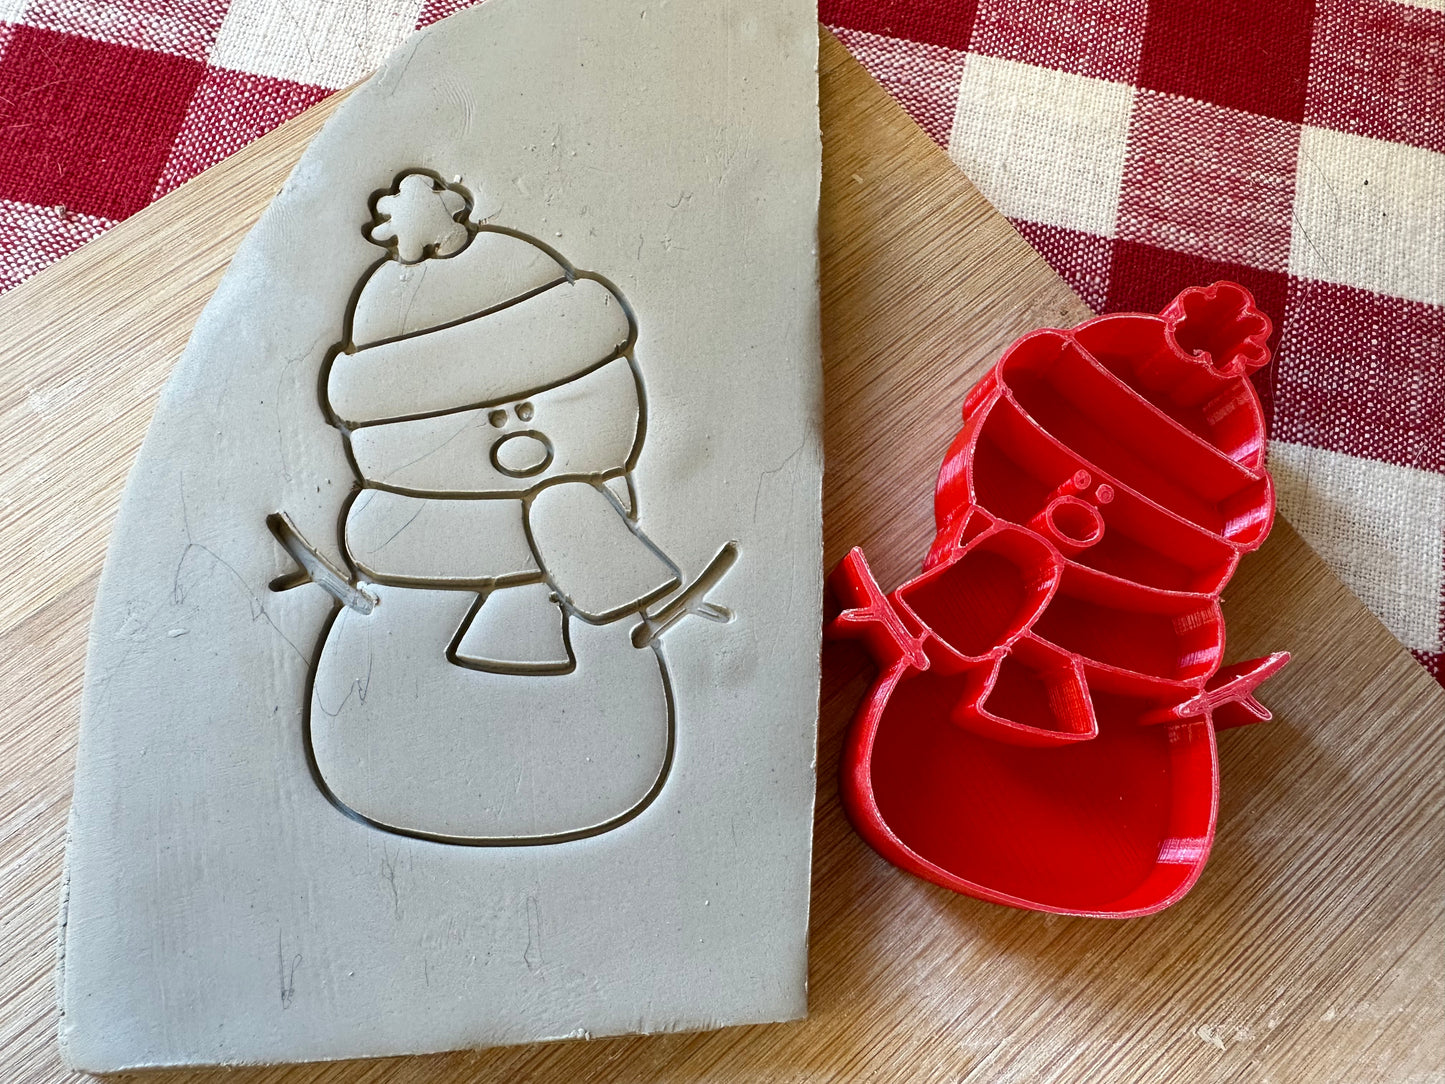 2023 Snowman pottery stamp - plastic 3D printed, multiple sizes available